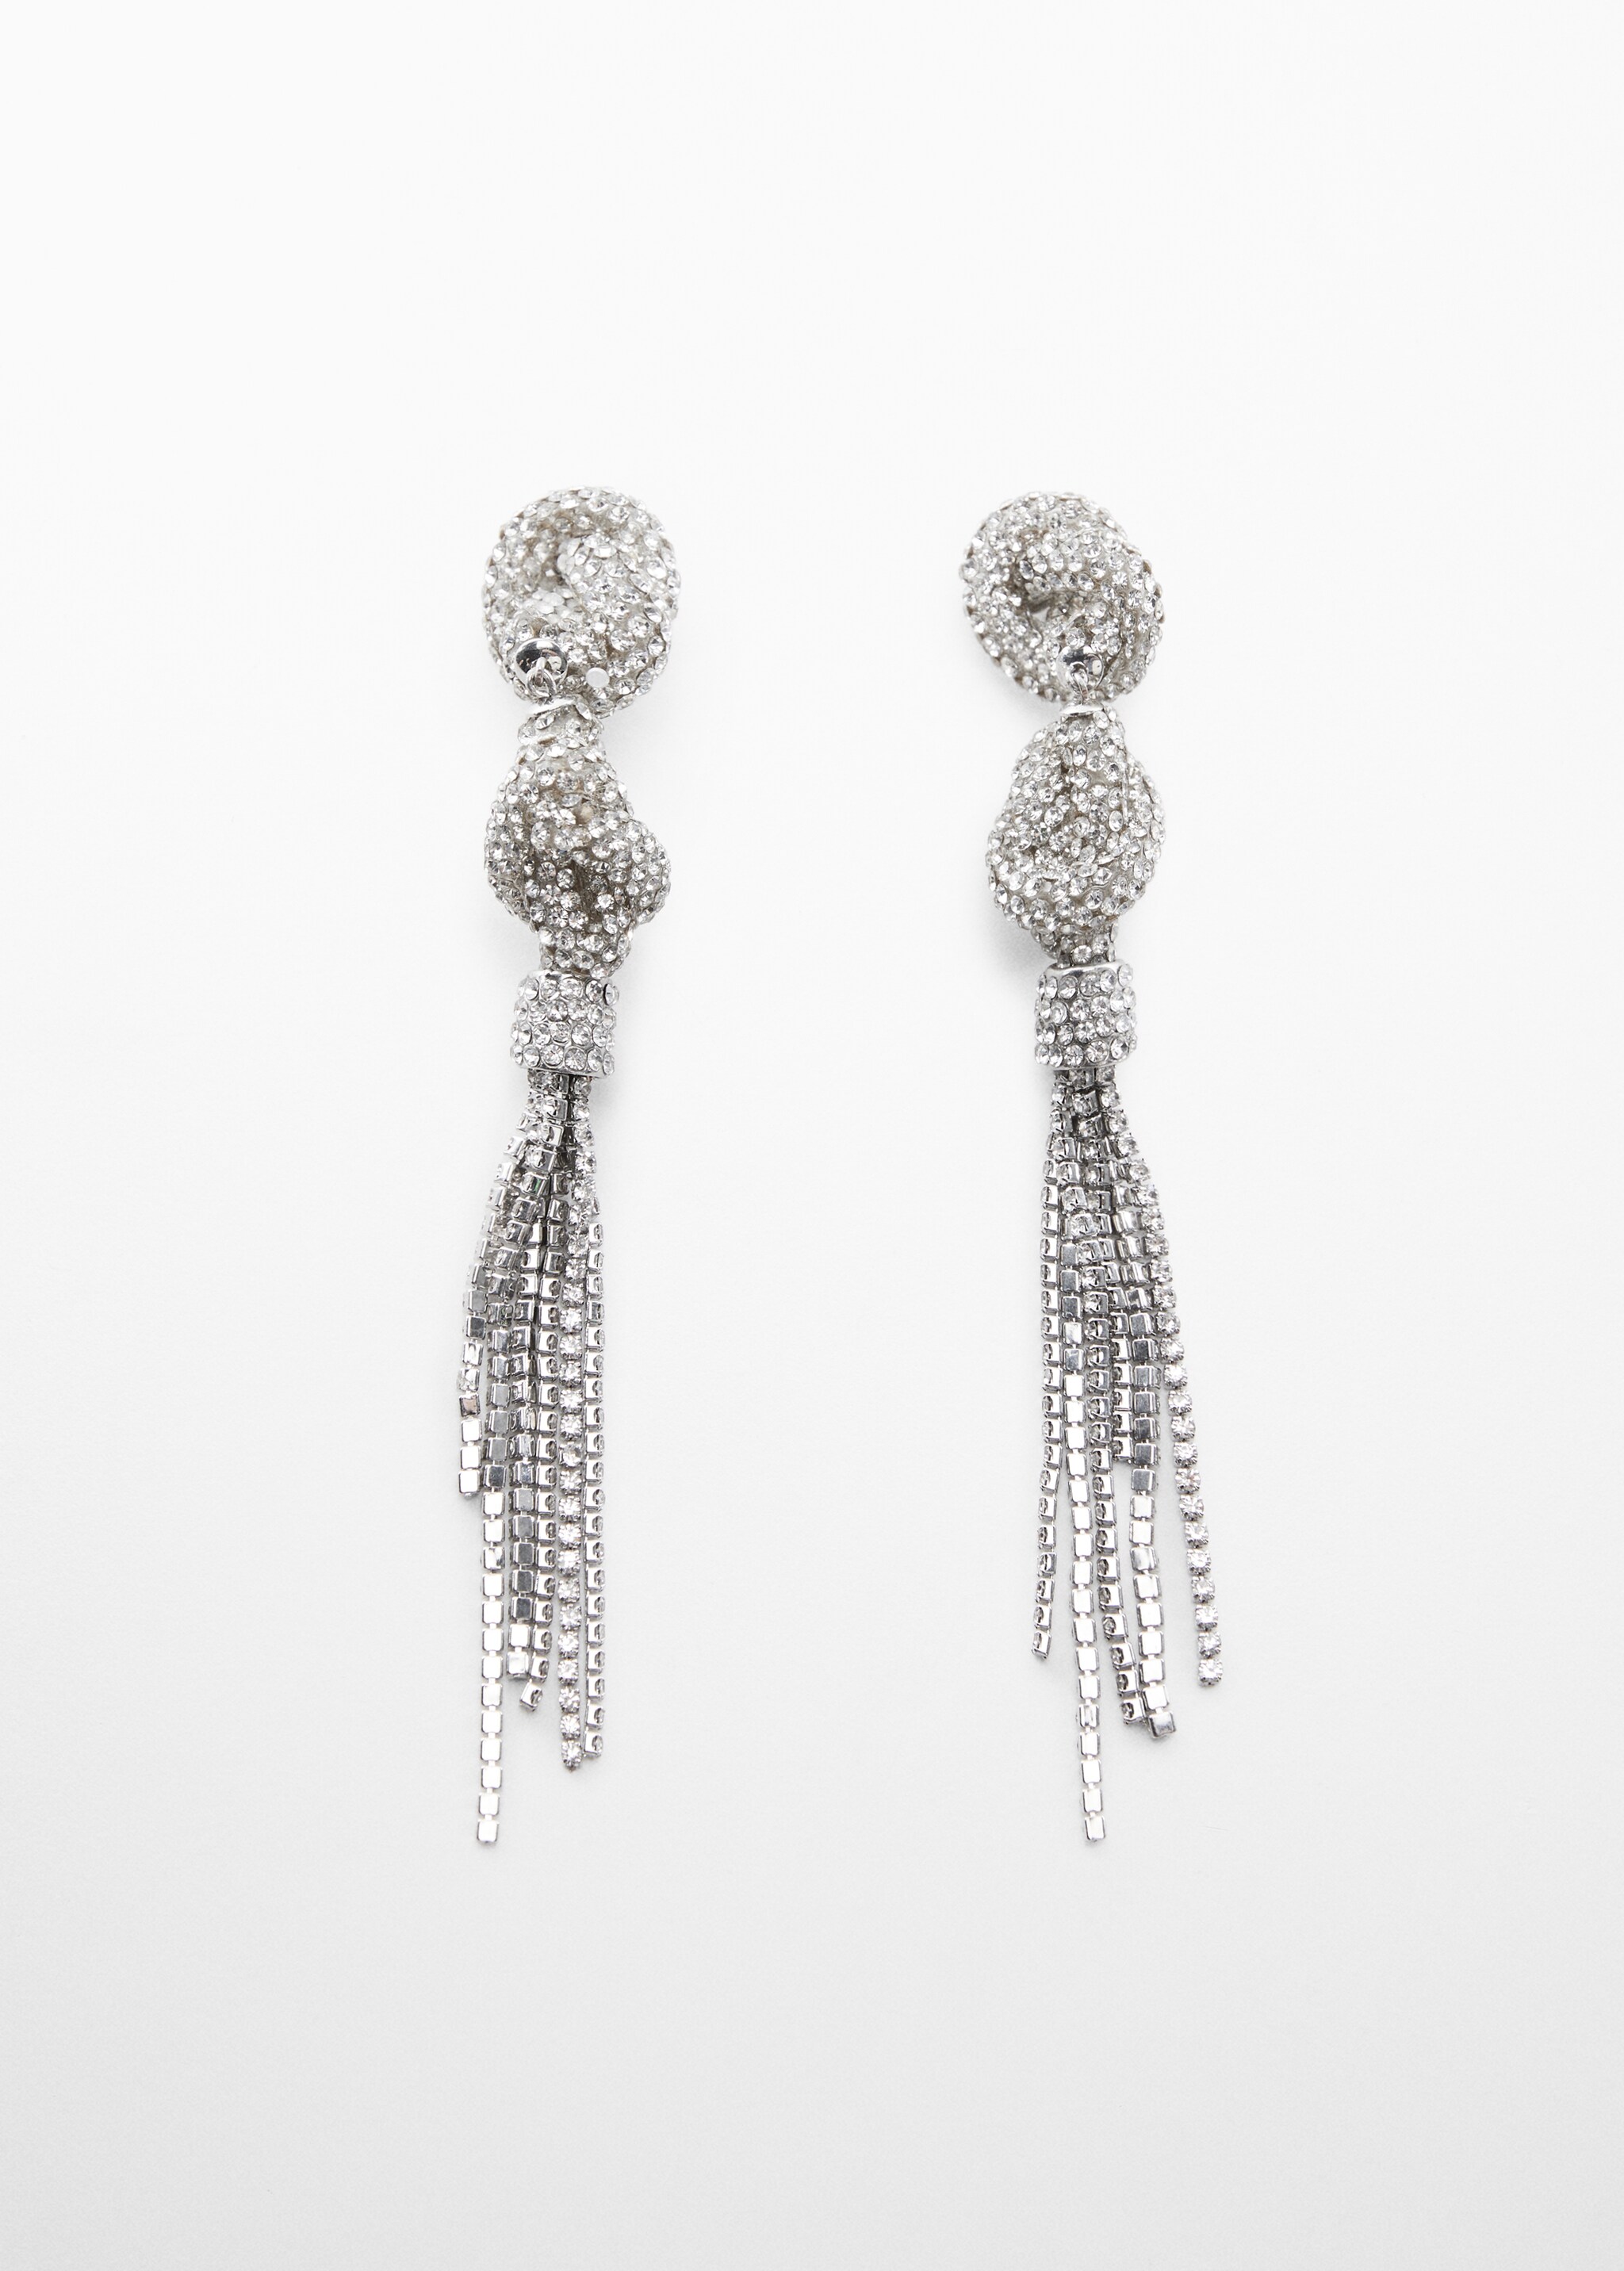 Earrings with crystals knots - Article without model